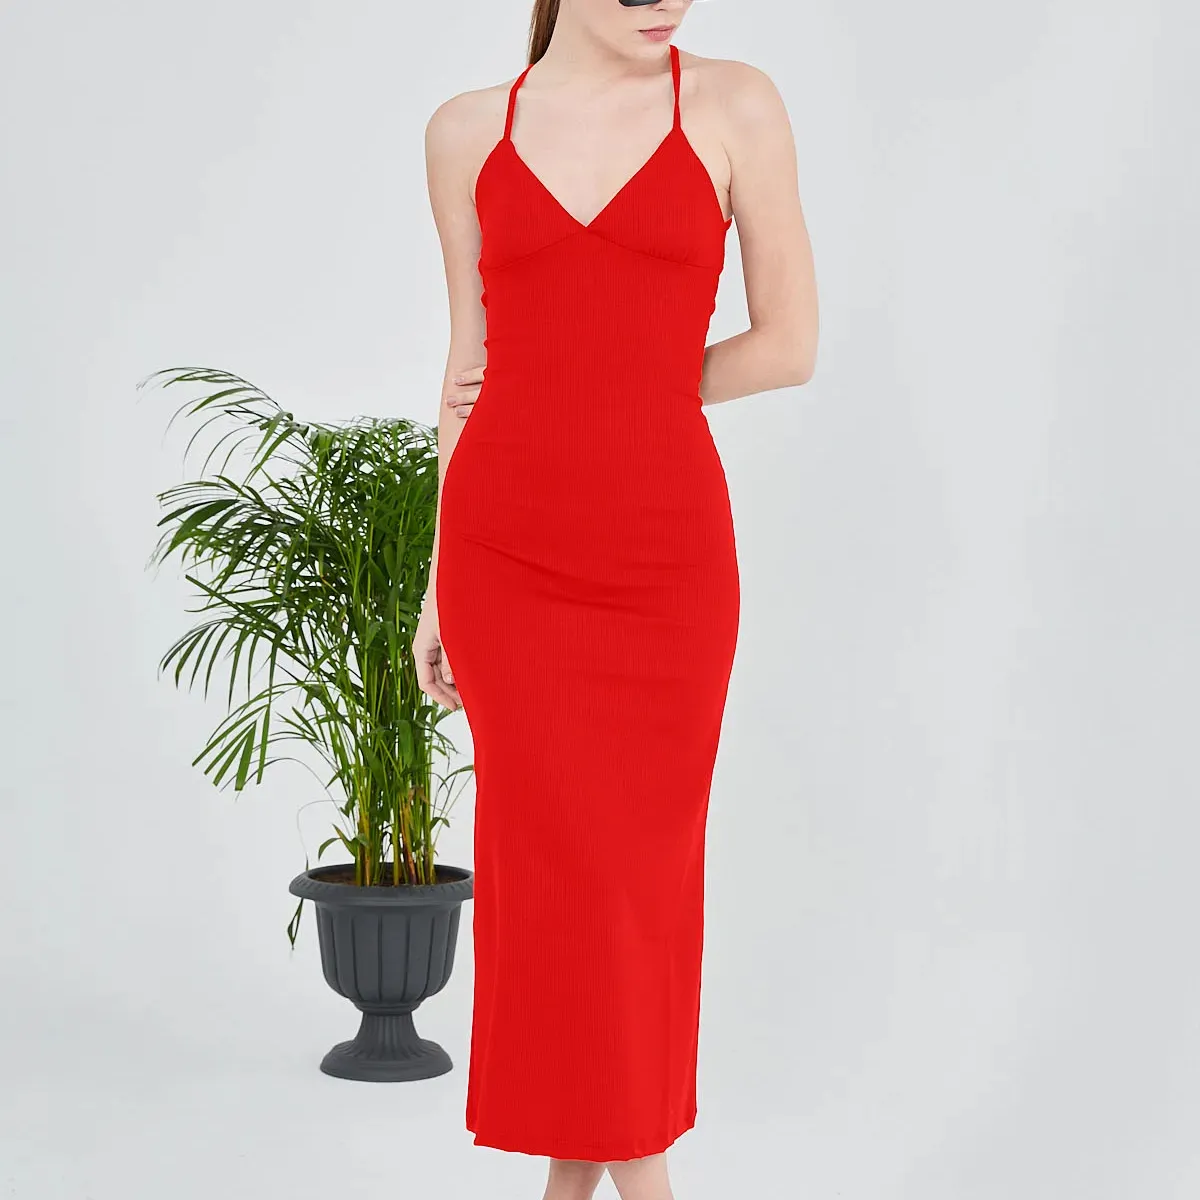 Maxi Length red Camisole Dress Well-Fitting Stylish Dress Elegant Dress With Back Detail green